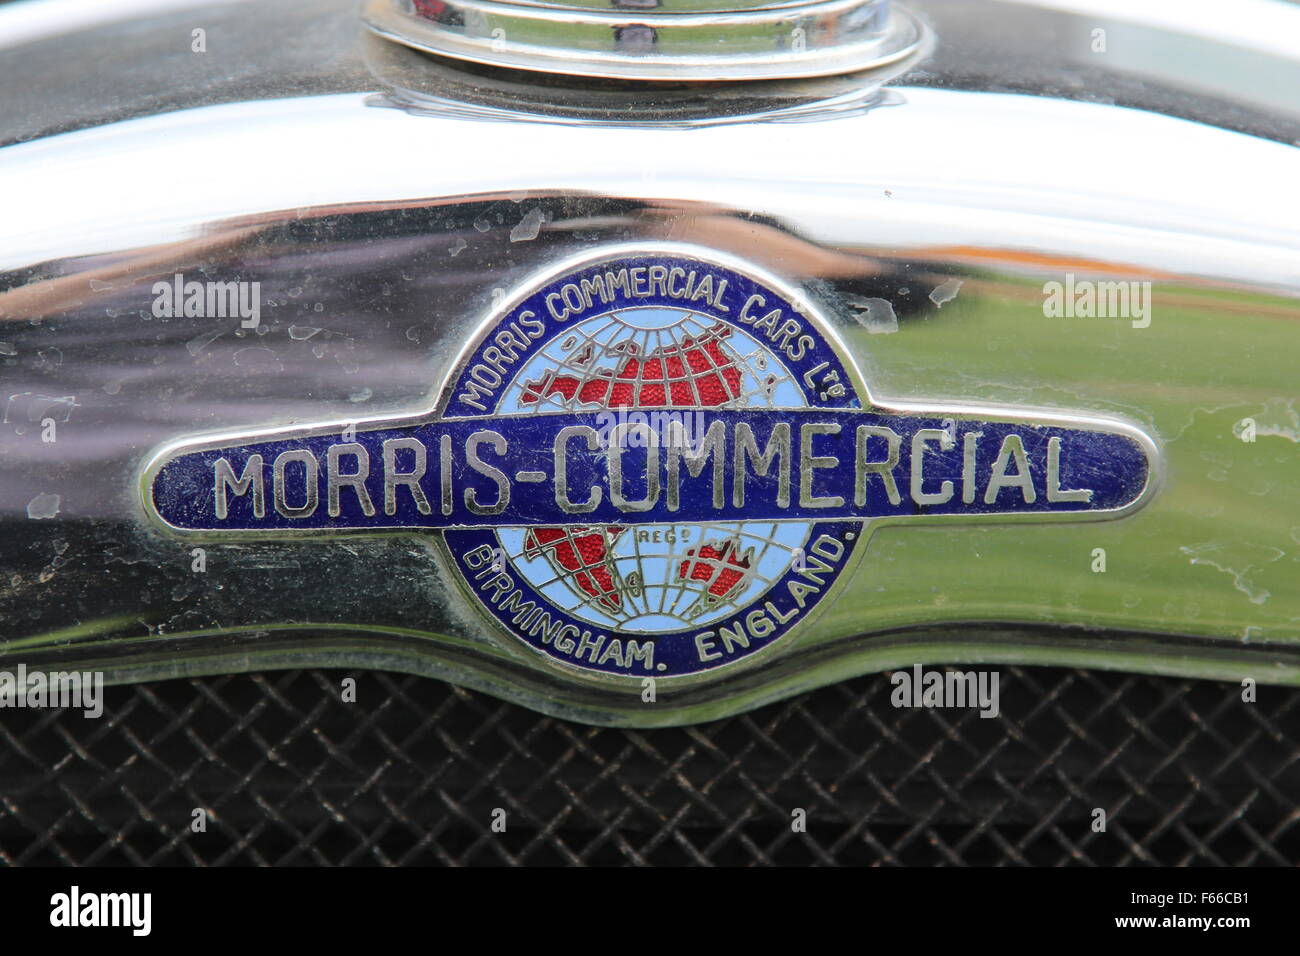 car badge on a Morris-Commercial vehicle Stock Photo